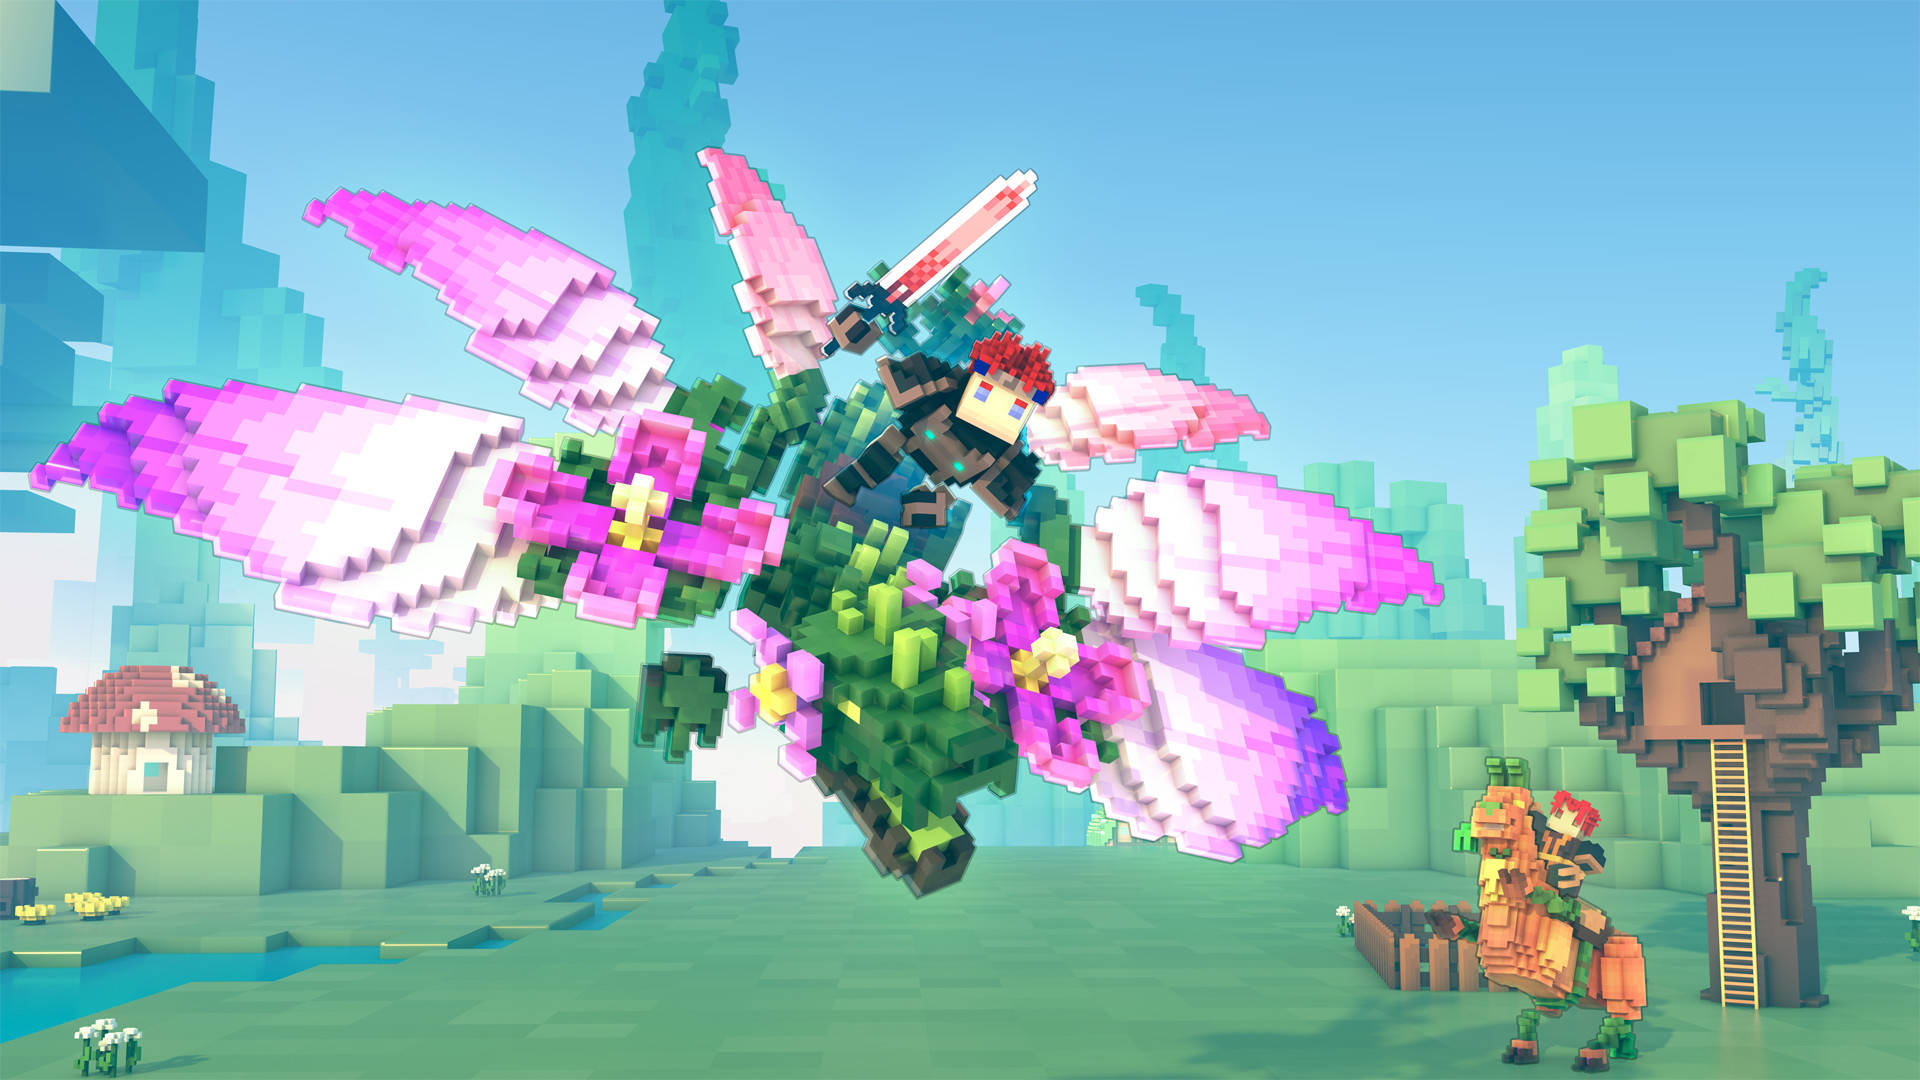 Best open-world games: a polygonal character is riding on a plant dragon in Trove while brandishing a sword. Another character is riding an orange llama and stands outside a treehouse.